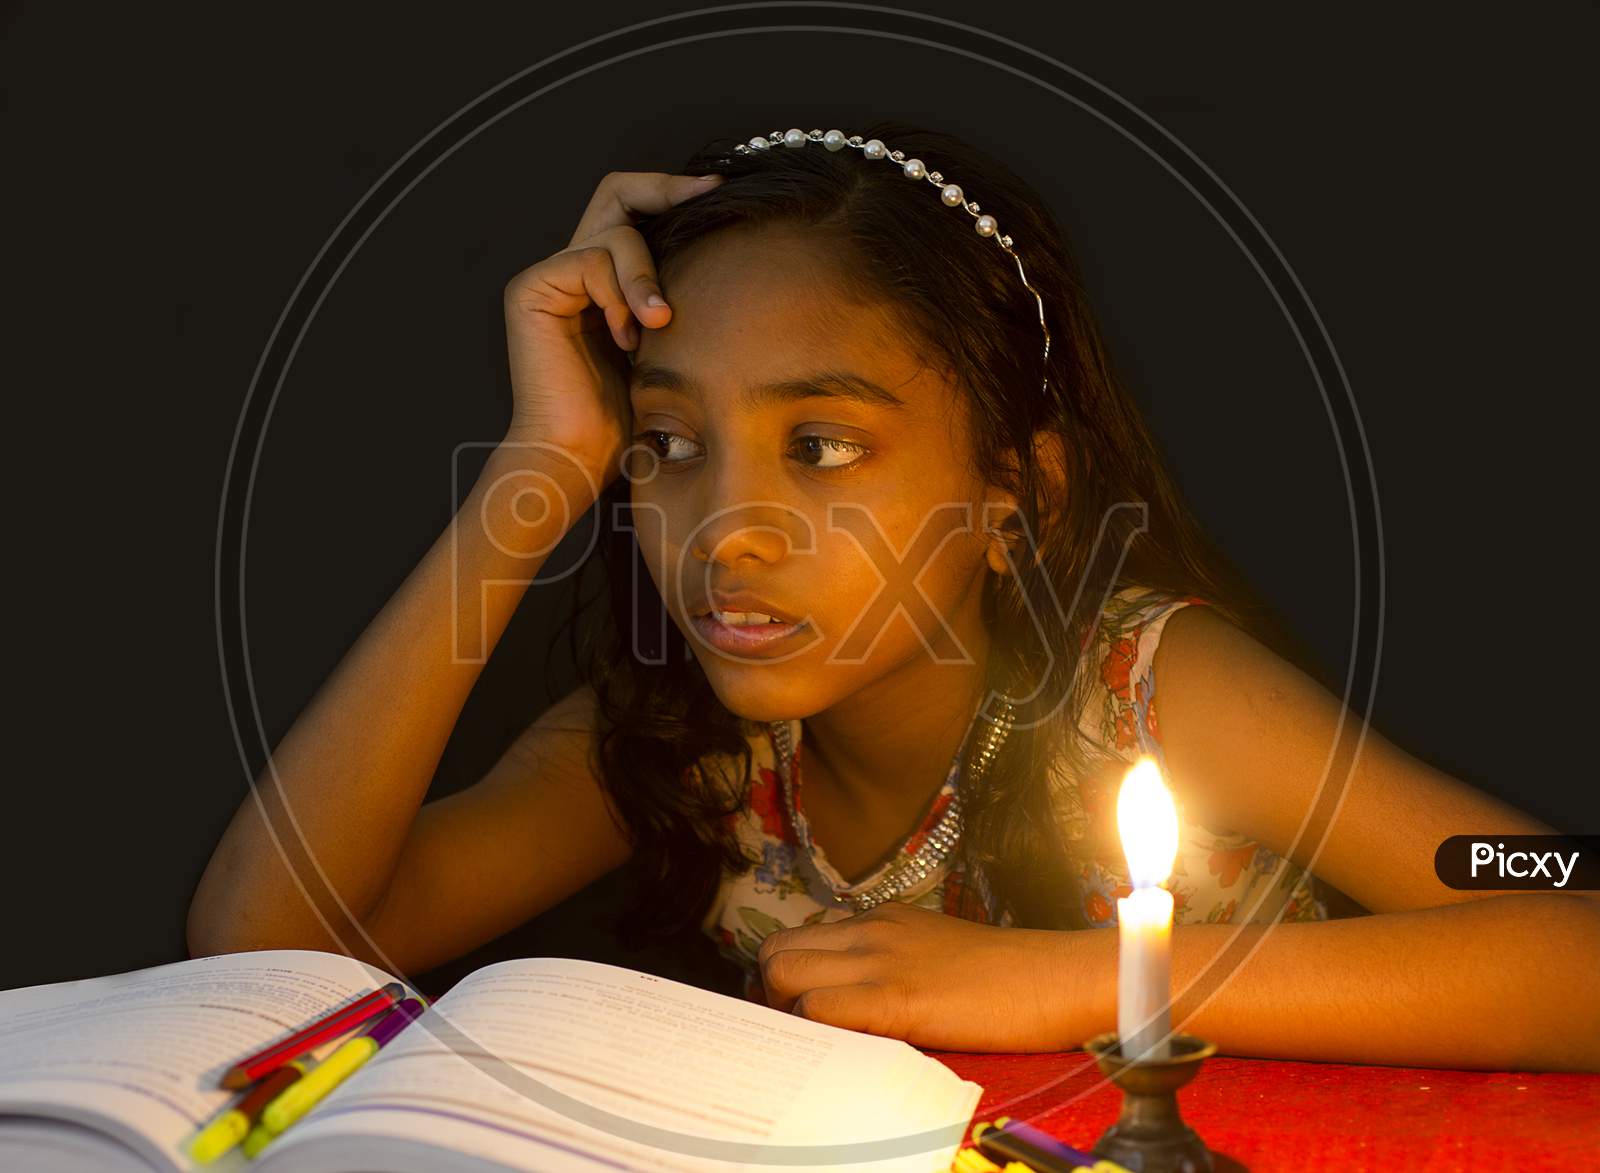 Portrait of a Kid with Books and Candle in the foreground